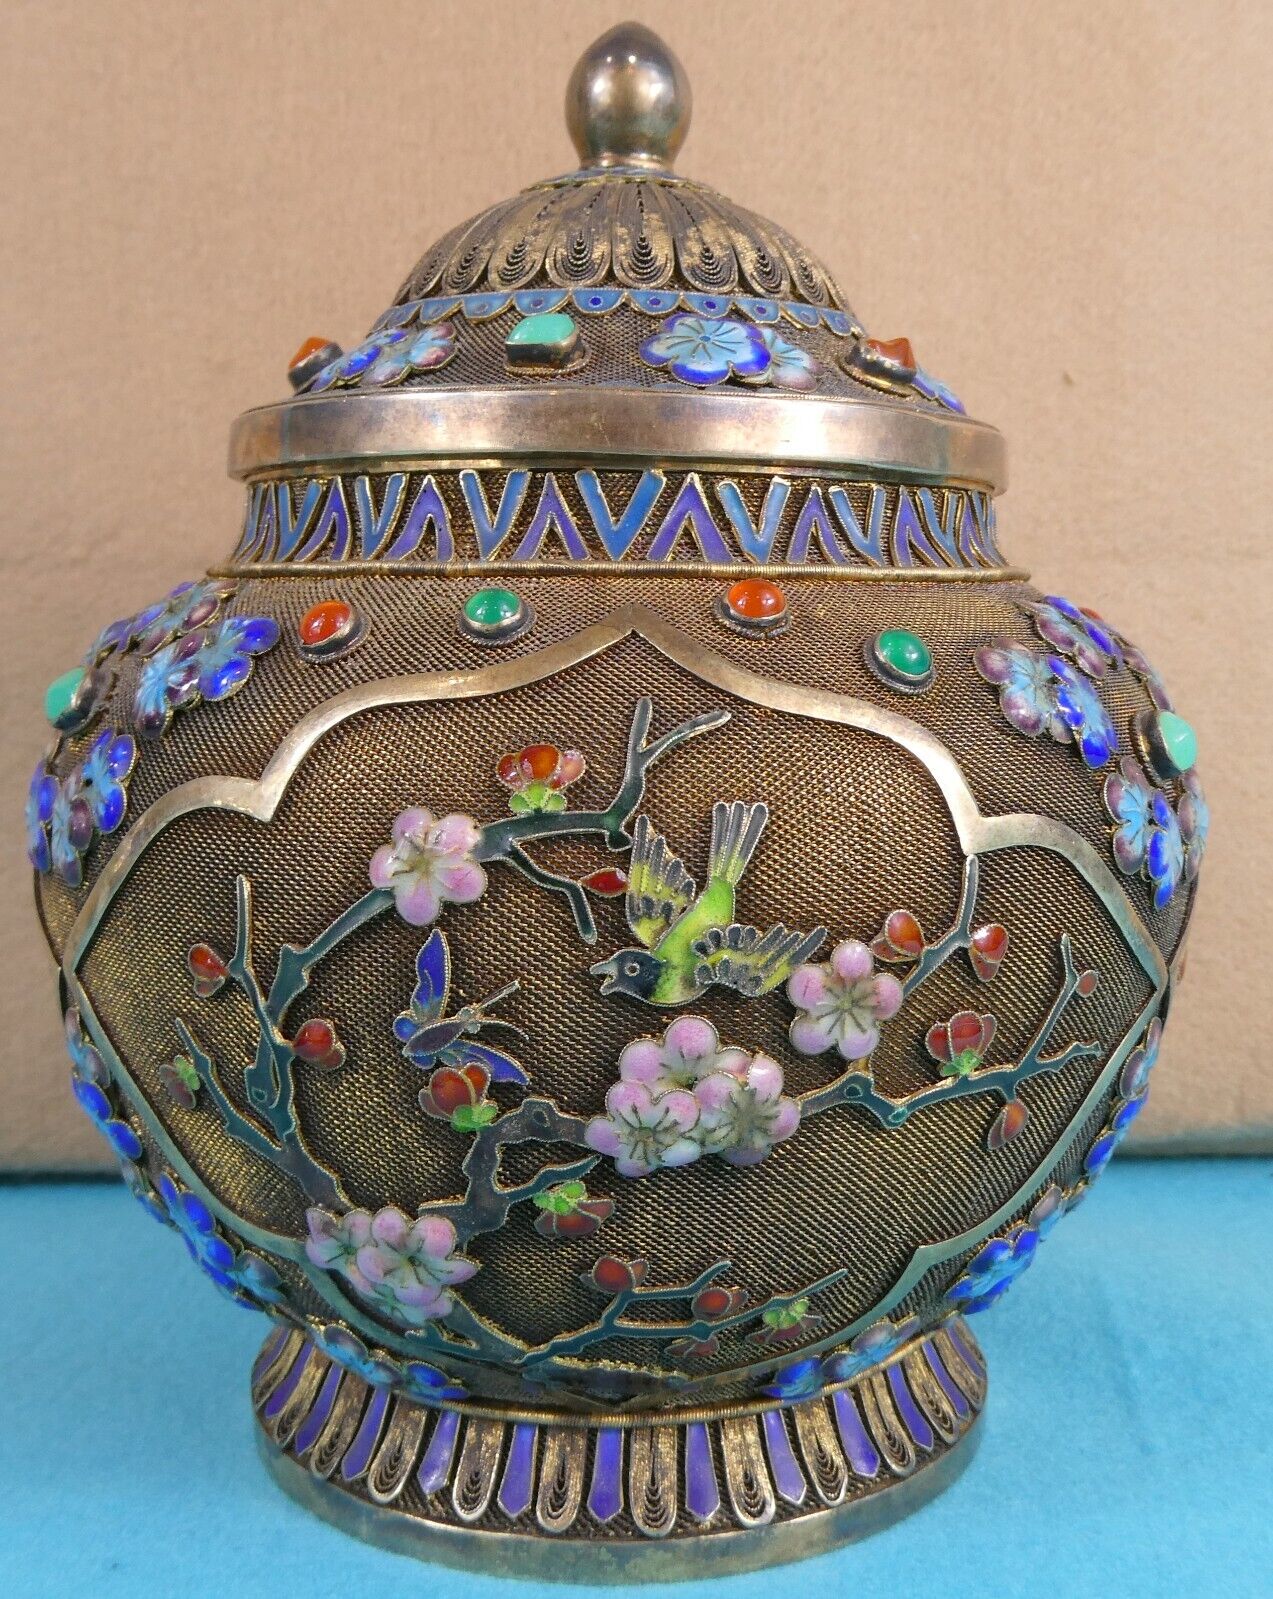 Antique Valuations: Chinese Sterling Silver Gilt Enamel Tea Caddy Box Filigree Bird Butterfly Flower